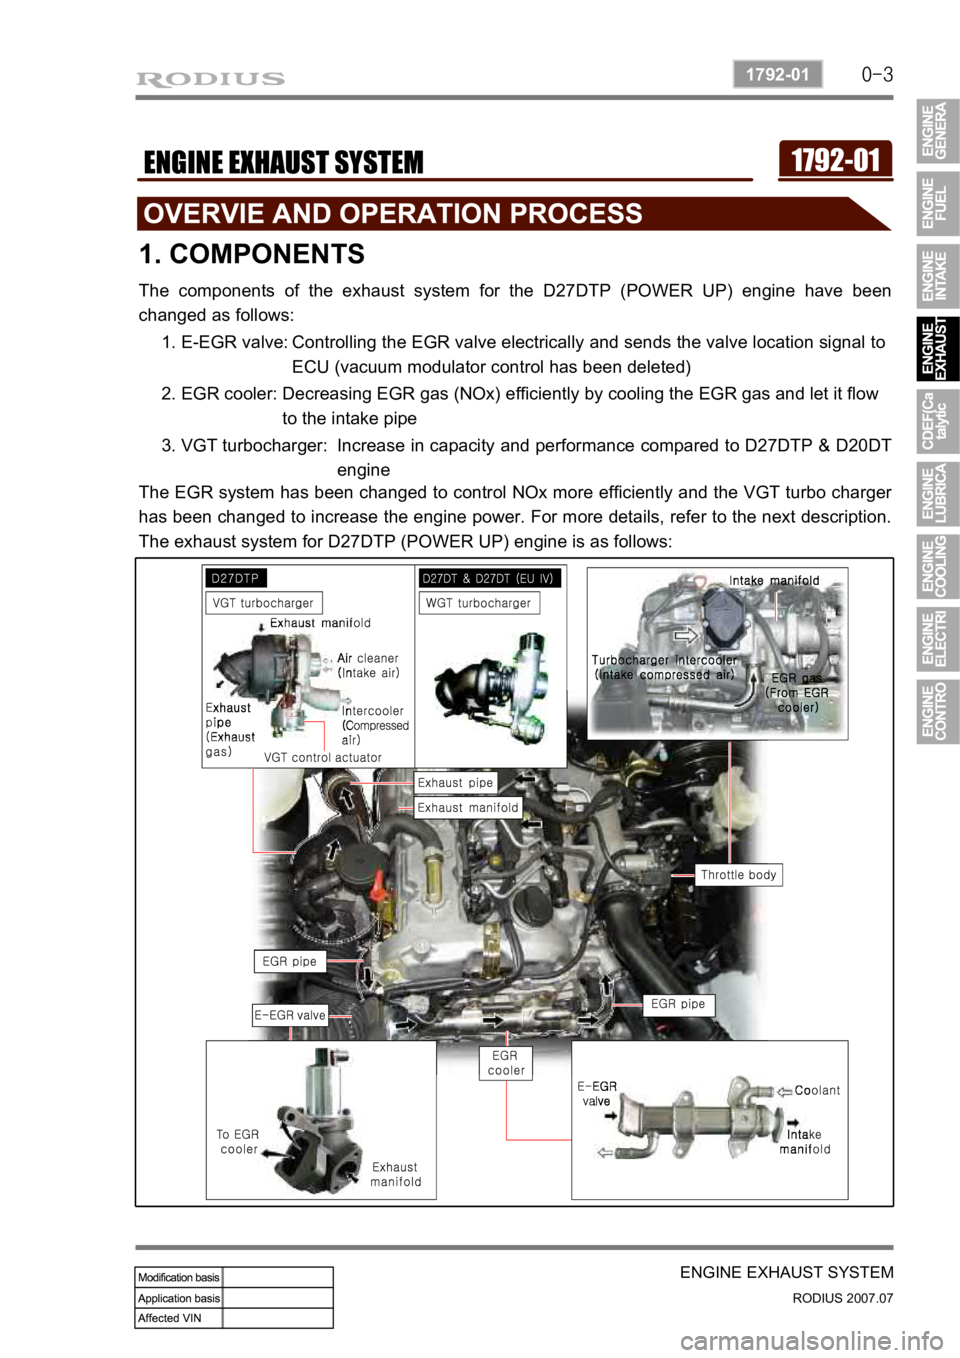 SSANGYONG RODIUS 2006  Service Manual 0-3
ENGINE EXHAUST SYSTEM
RODIUS 2007.07
1792-01
1792-01ENGINE EXHAUST SYSTEM
1. COMPONENTS
The components of the exhaust system for the D27DTP (POWER UP) engine have been 
changed as follows:
1. E-EG